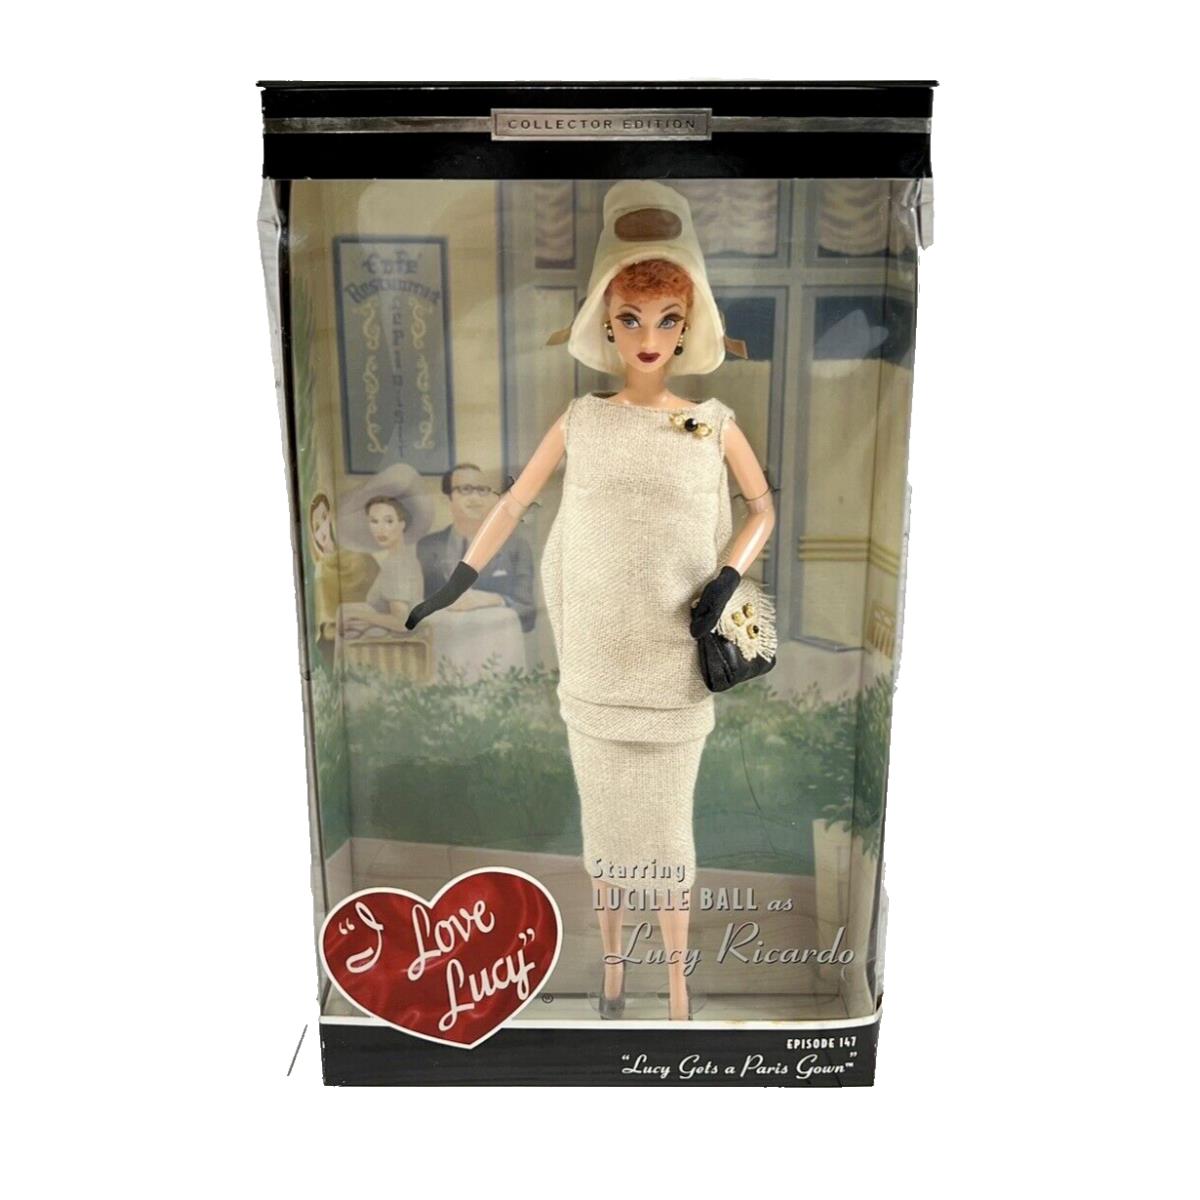 I Love Lucy Barbie Lucy Gets a Paris Gown Episode 147 Collectors Edition 2002